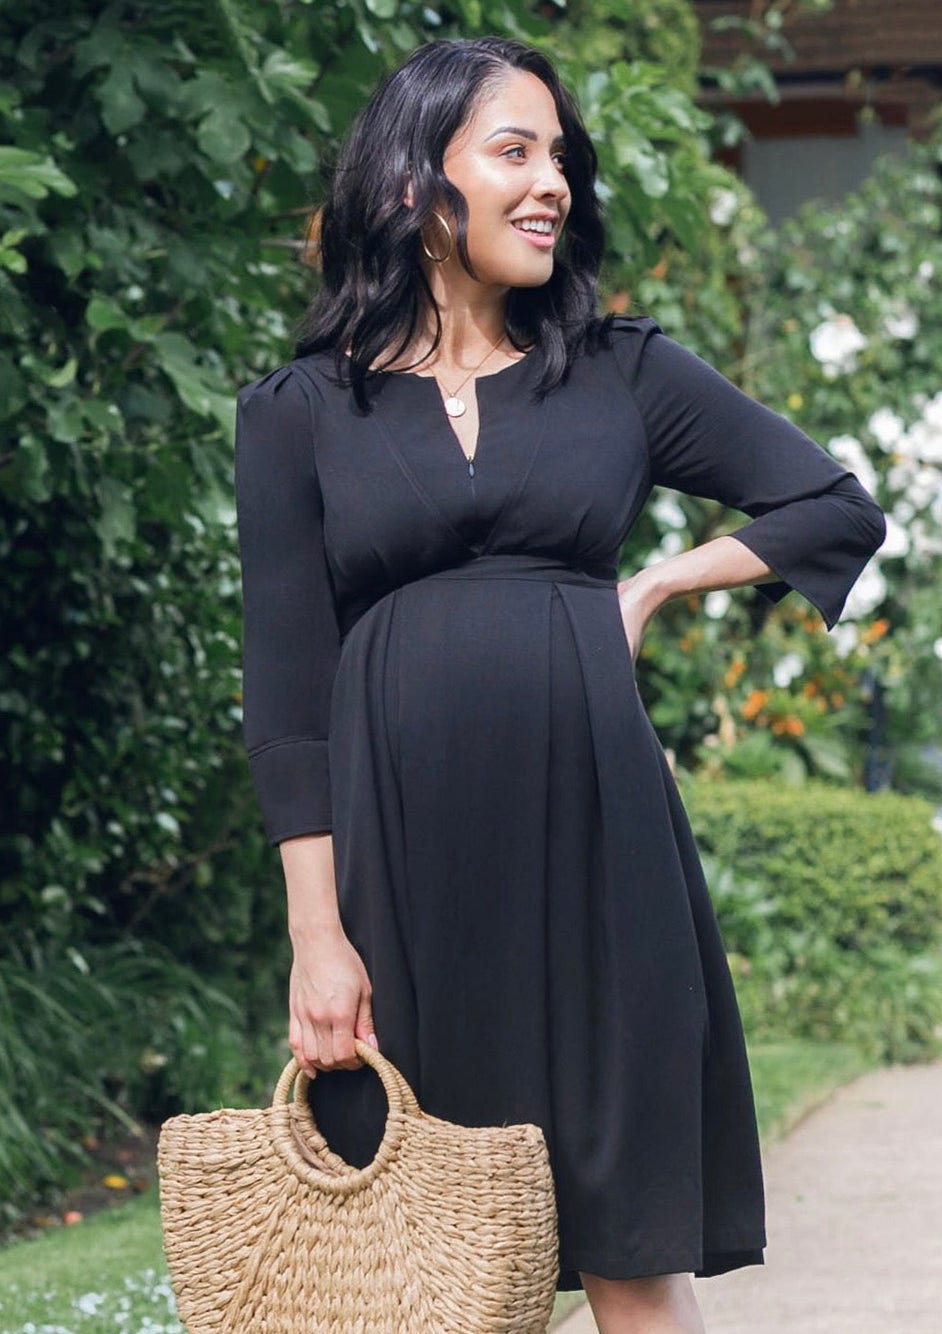 The Maternity Dress Styles every pregnant woman needs